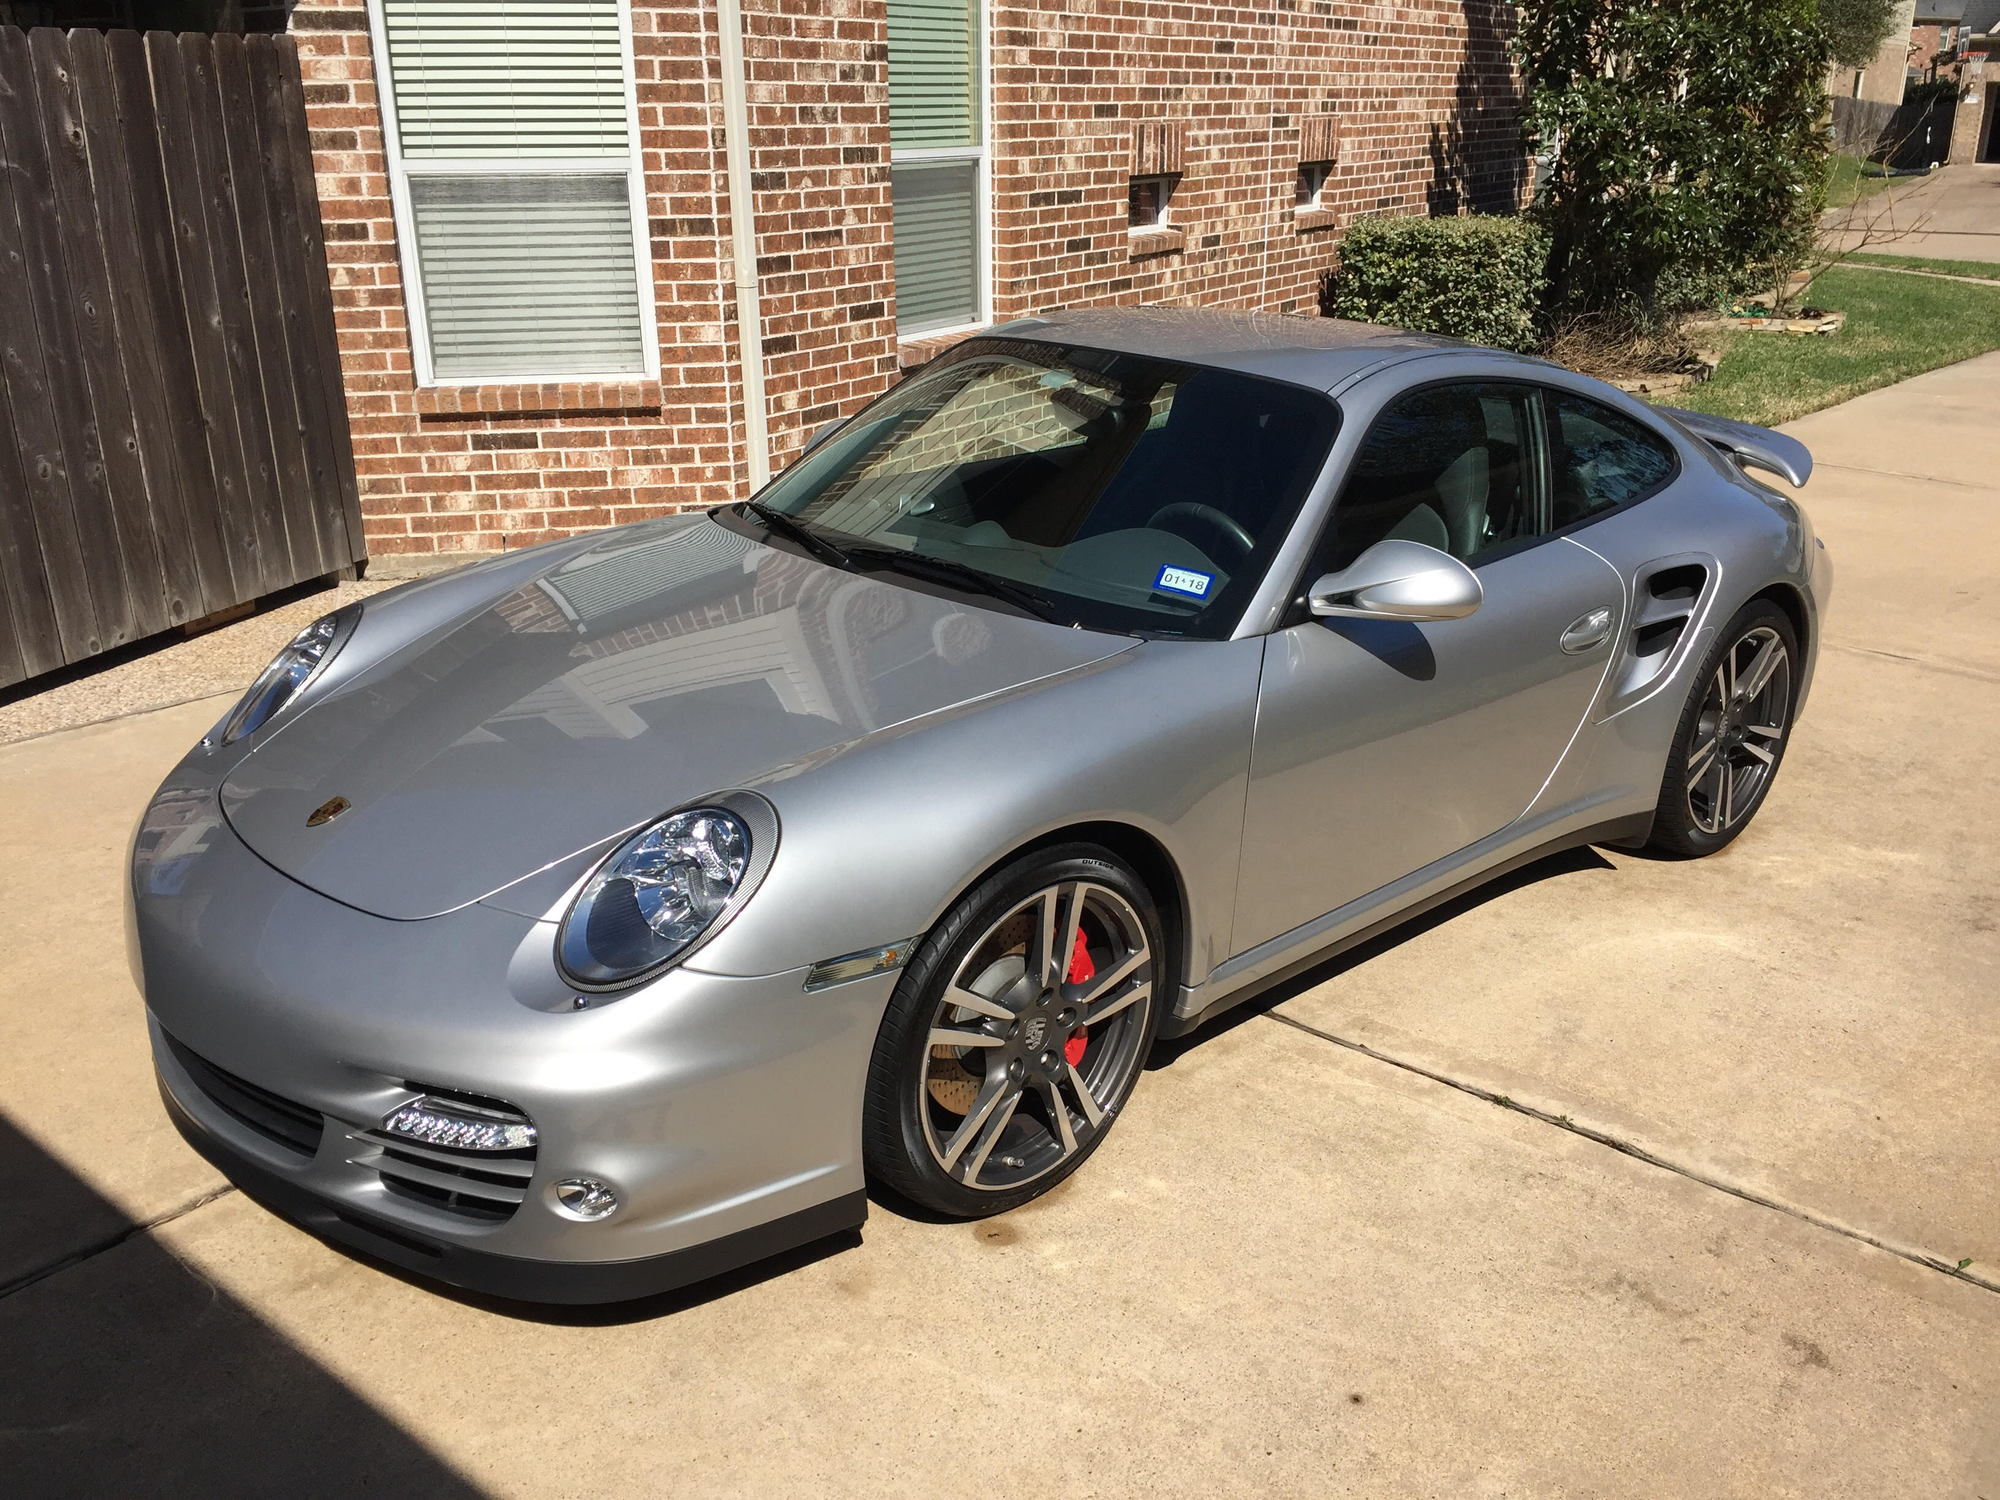 2010 Porsche 911 - 2010 Porsche 911 Turbo (997.2 TT PDK) - Used - VIN WP0AD2A96AS766371 - 6 cyl - AWD - Automatic - Coupe - Silver - Cypress, TX 77429, United States